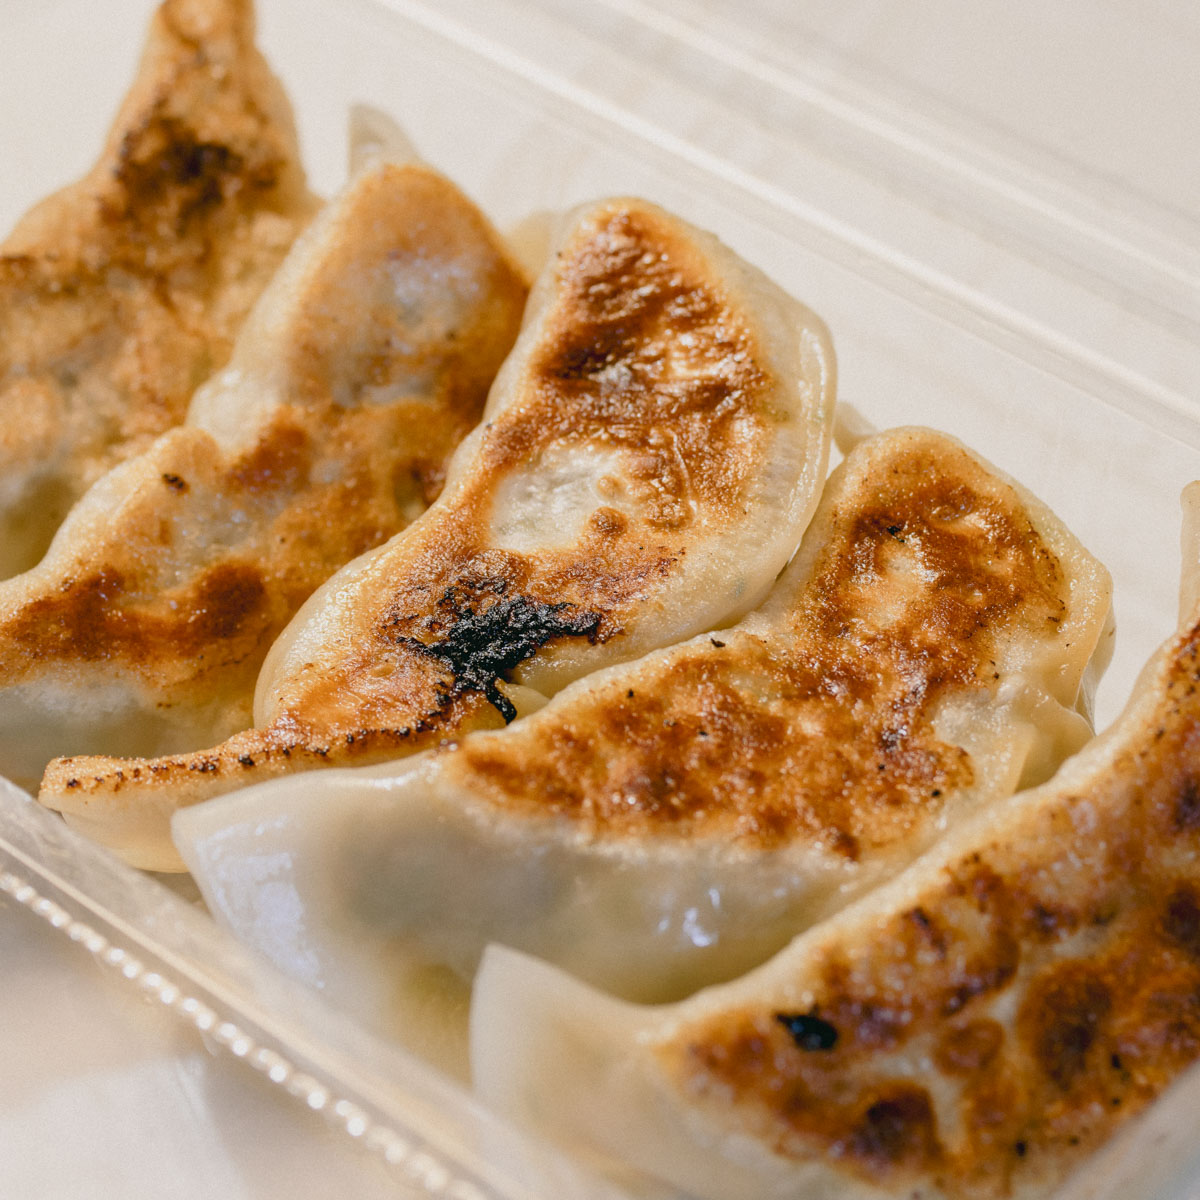 Grilled gyoza in a take away tray - Come on Mate! Gourmet Japanese